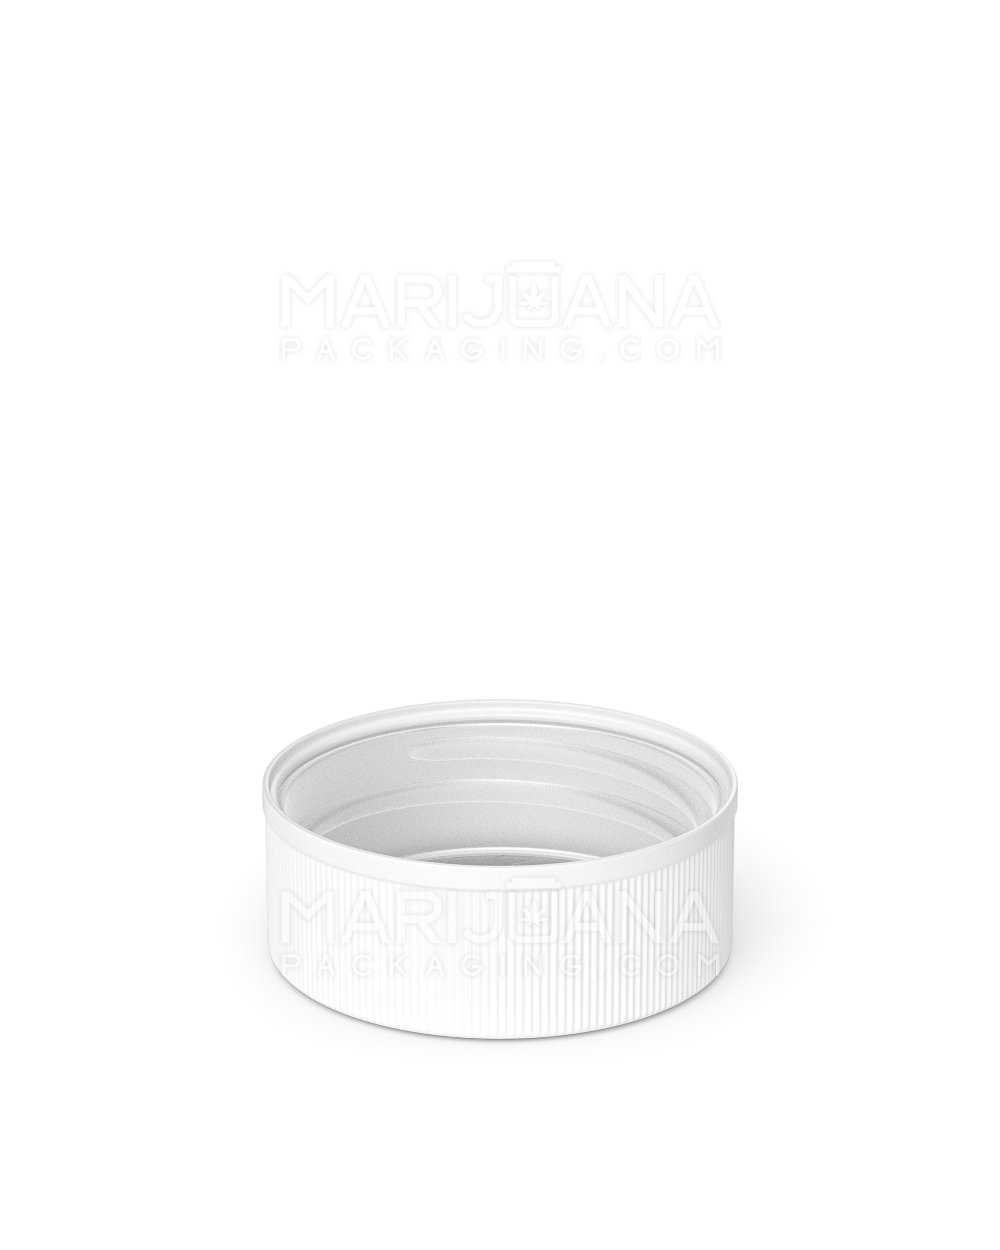 Child Resistant | Ribbed Push Down and Turn Plastic Caps w/ Foil Liner | 38mm - Semi Gloss White - 320 Count - 4